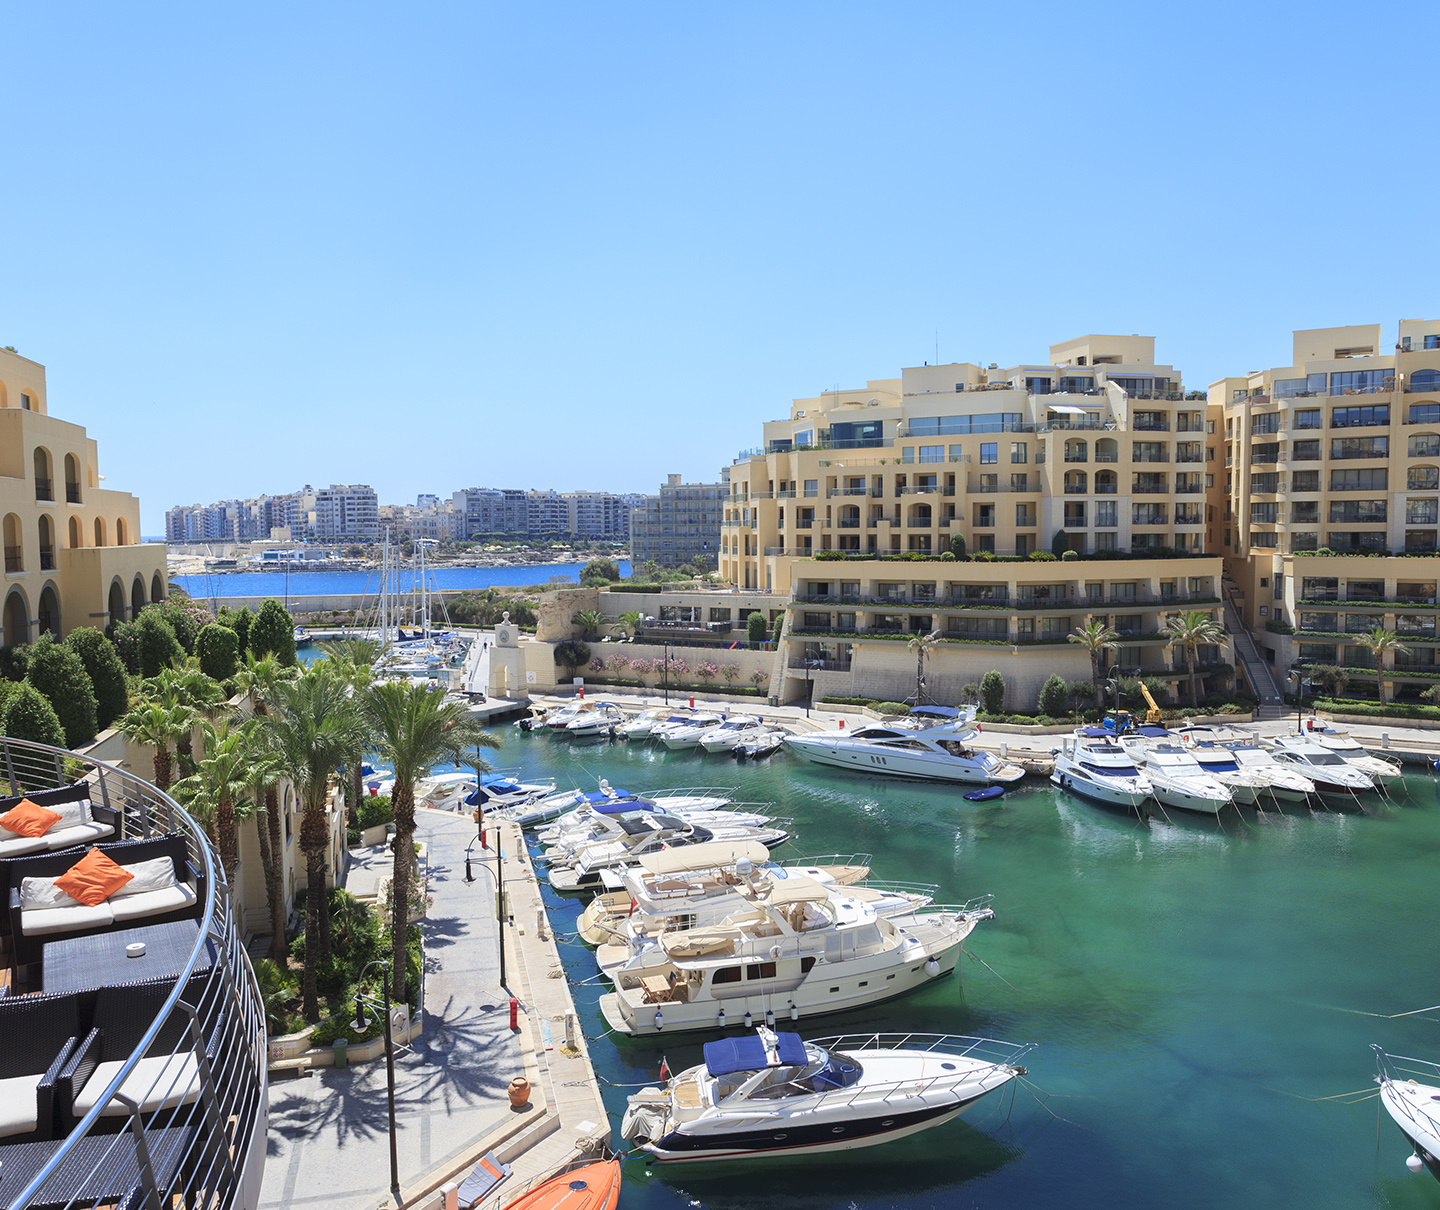 Malta IIP investors spend 2.5x the minimum on homes to qualify for citizenship